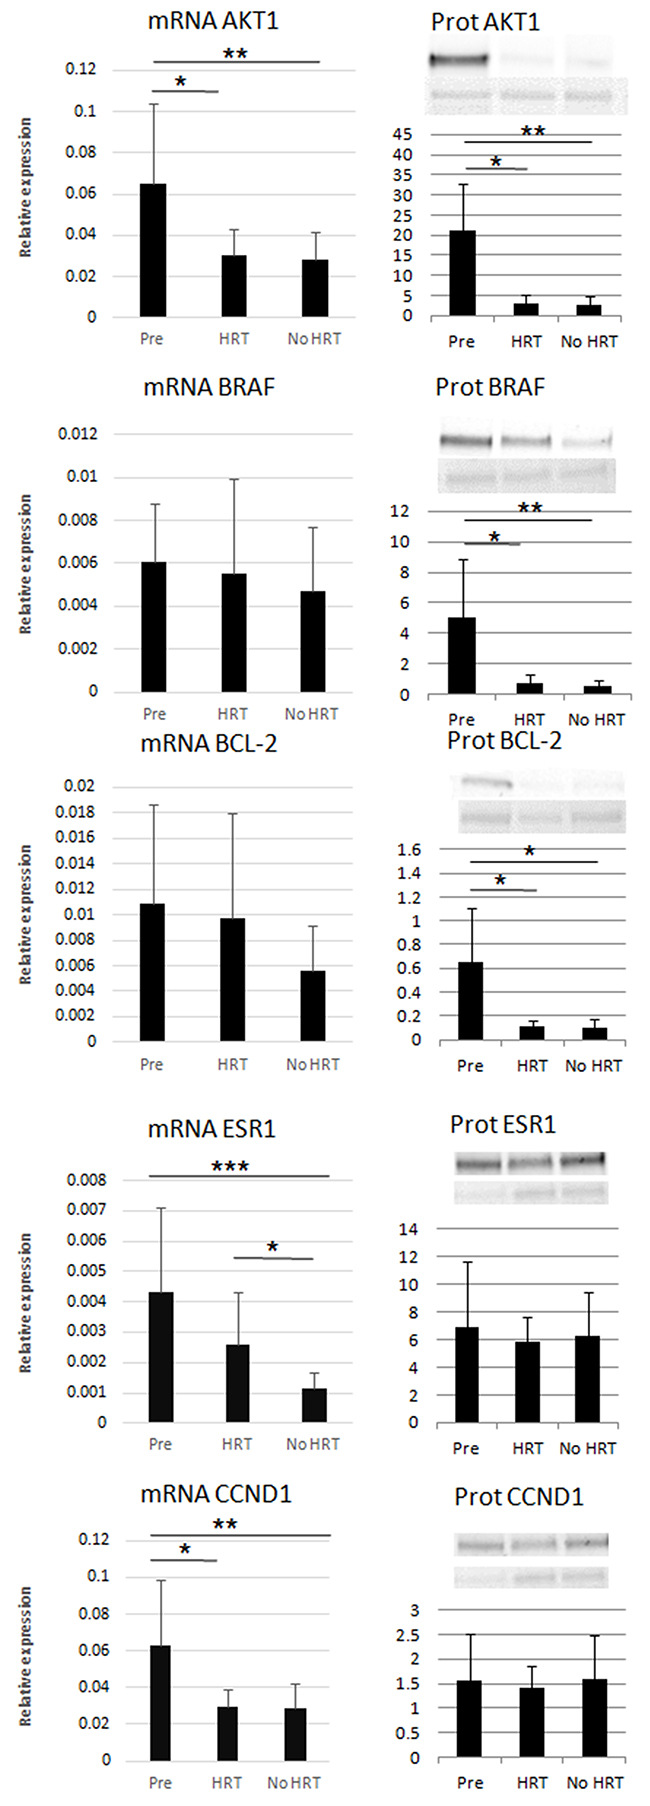 Relative mRNA expression and protein levels of the miR targets.